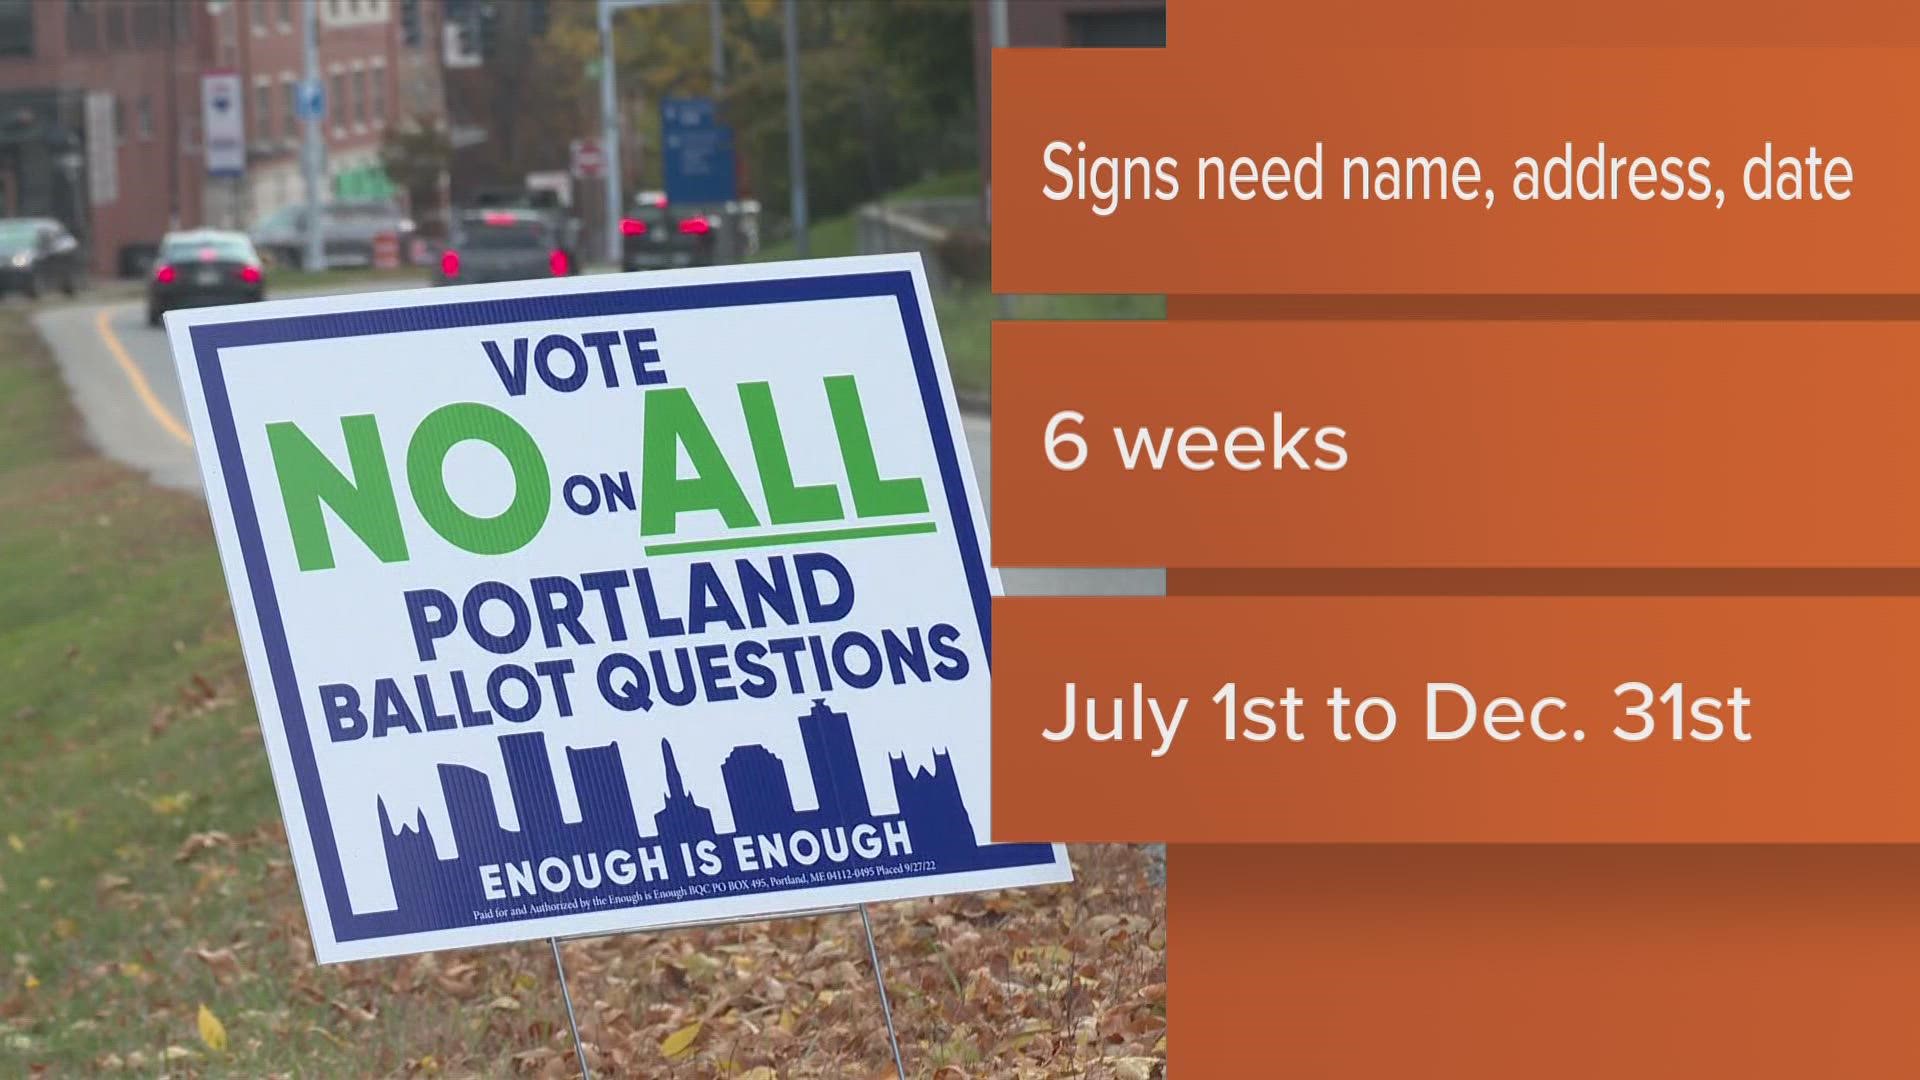 The secretary of state's office says temporary signs may not be placed in the public right of way for more than six weeks between July and December.